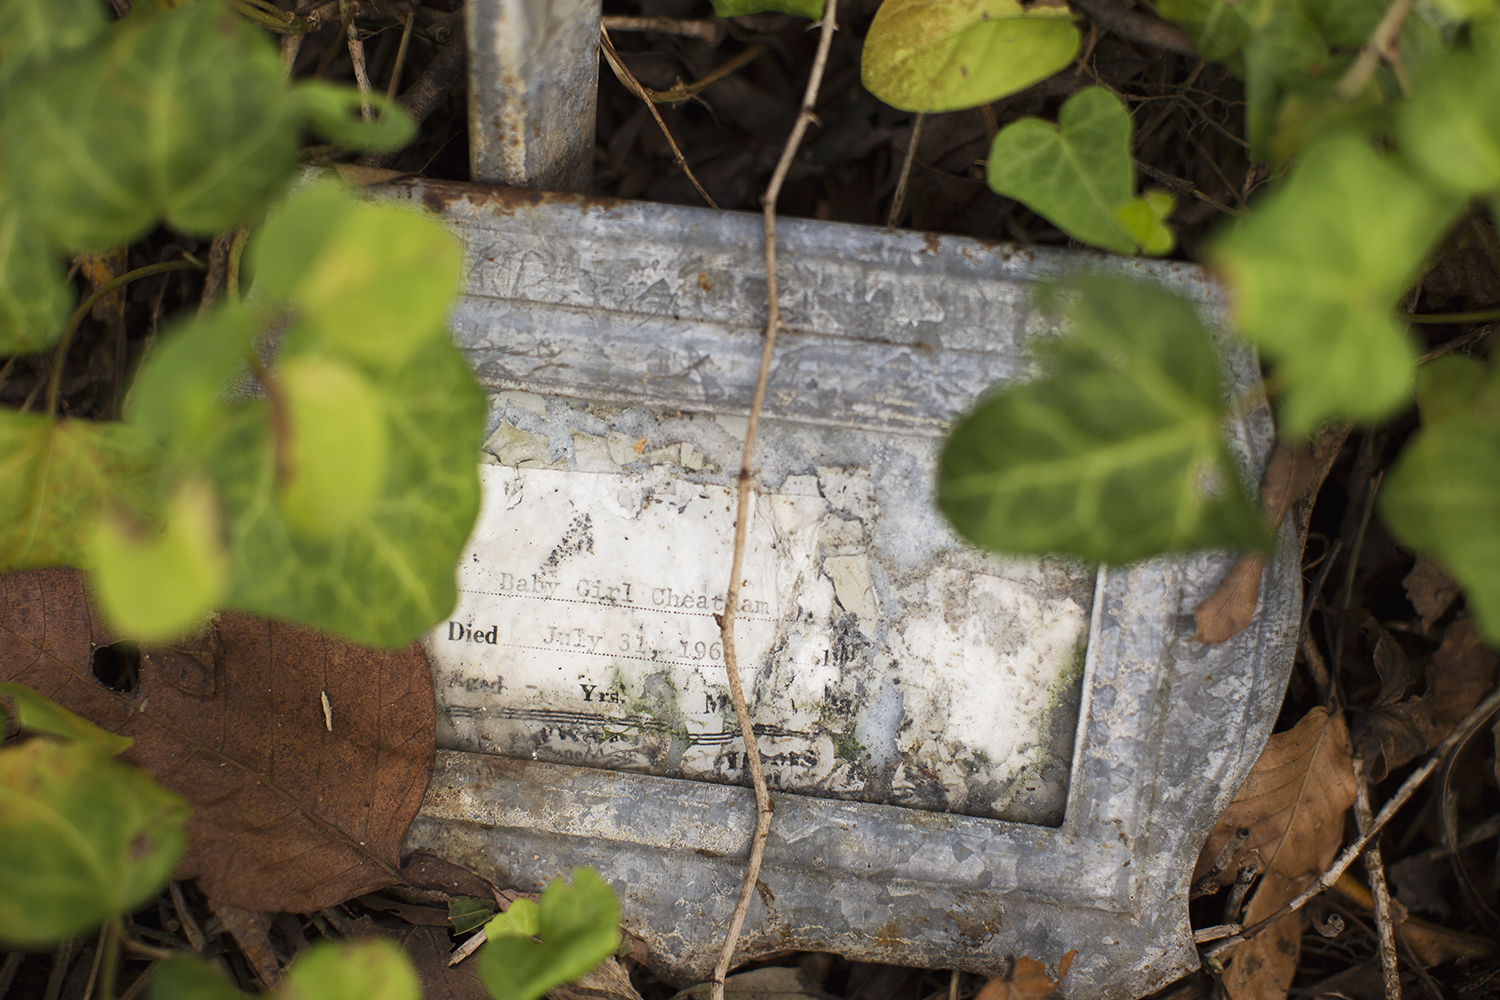  Temporary marker for "Baby Girl Cheatham." East End Cemetery, Henrico County, Virginia, October 2015. Photo: ©BP 